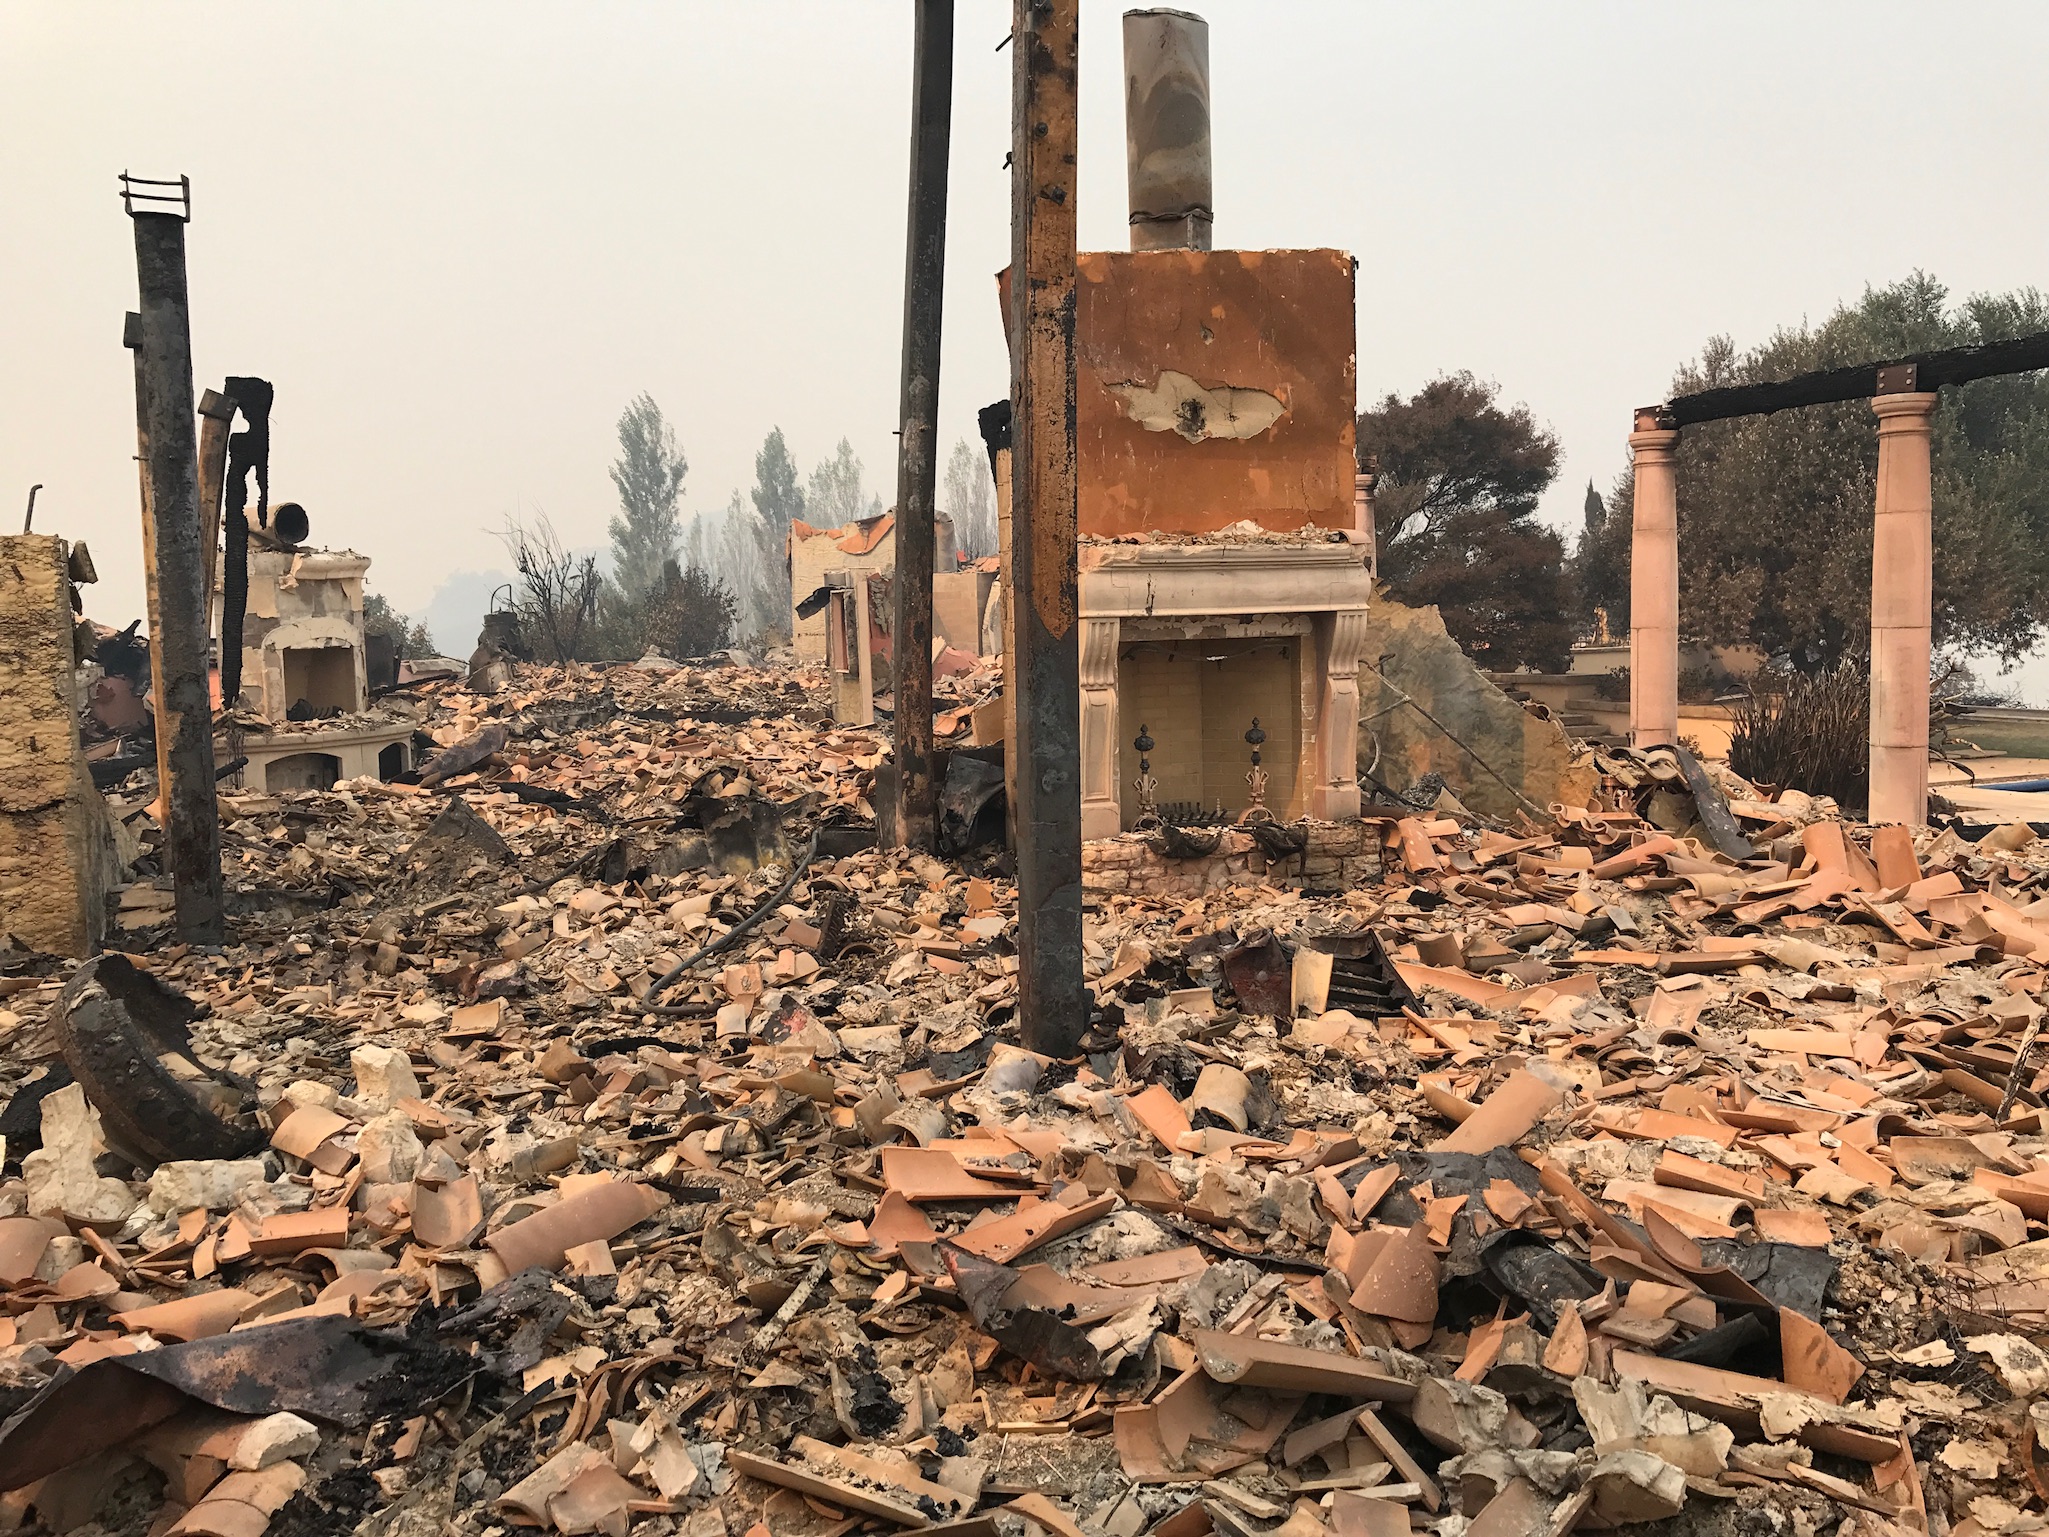 Pulido~Walker Estate in ruin after apocalyptic Wine Country Fires.